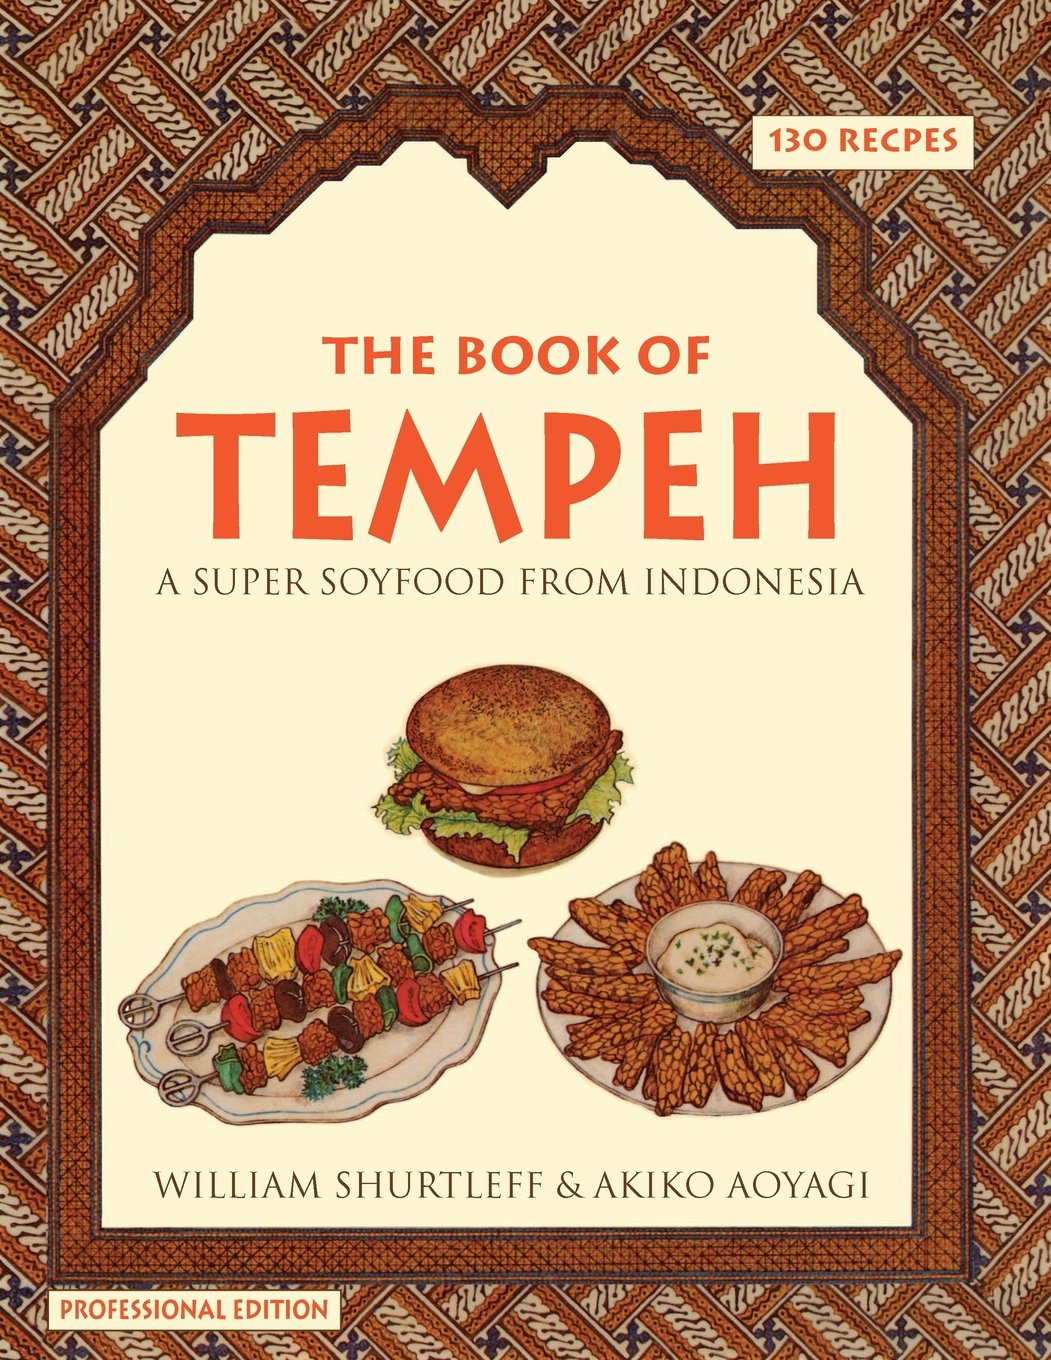 THE BOOK OF TEMPEH